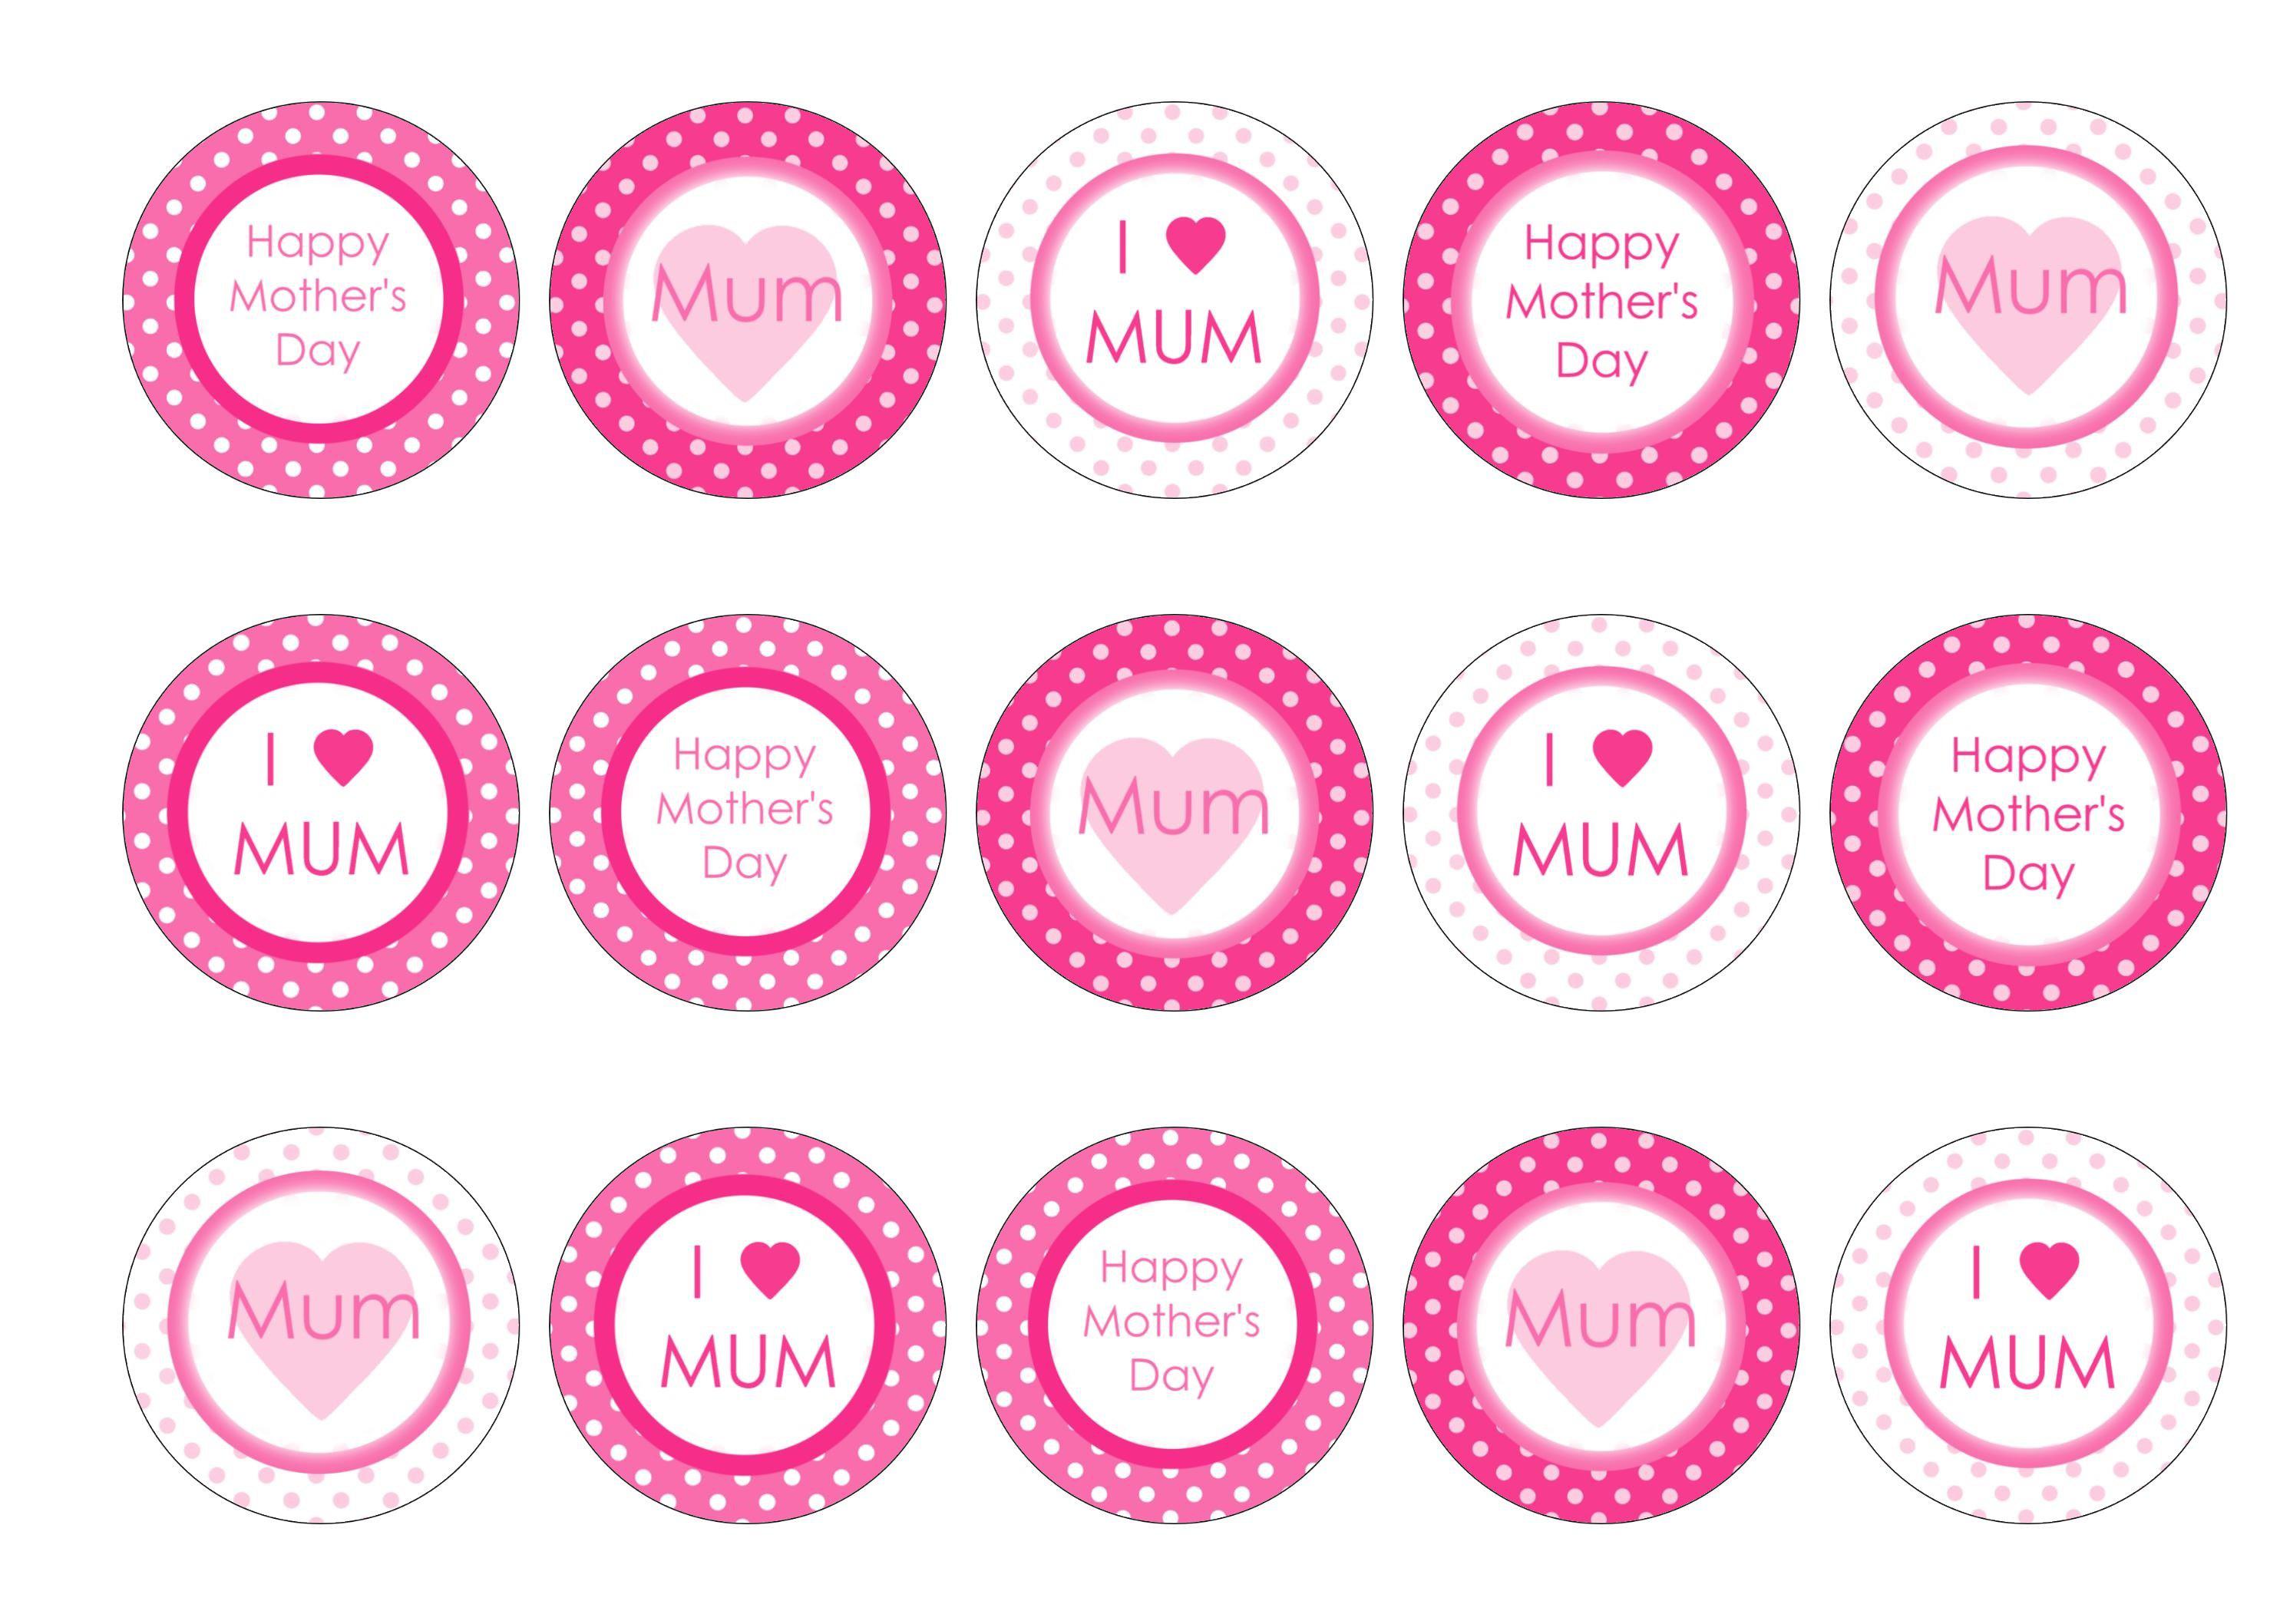 Edible cupcake toppers in pink Mother's Day designs